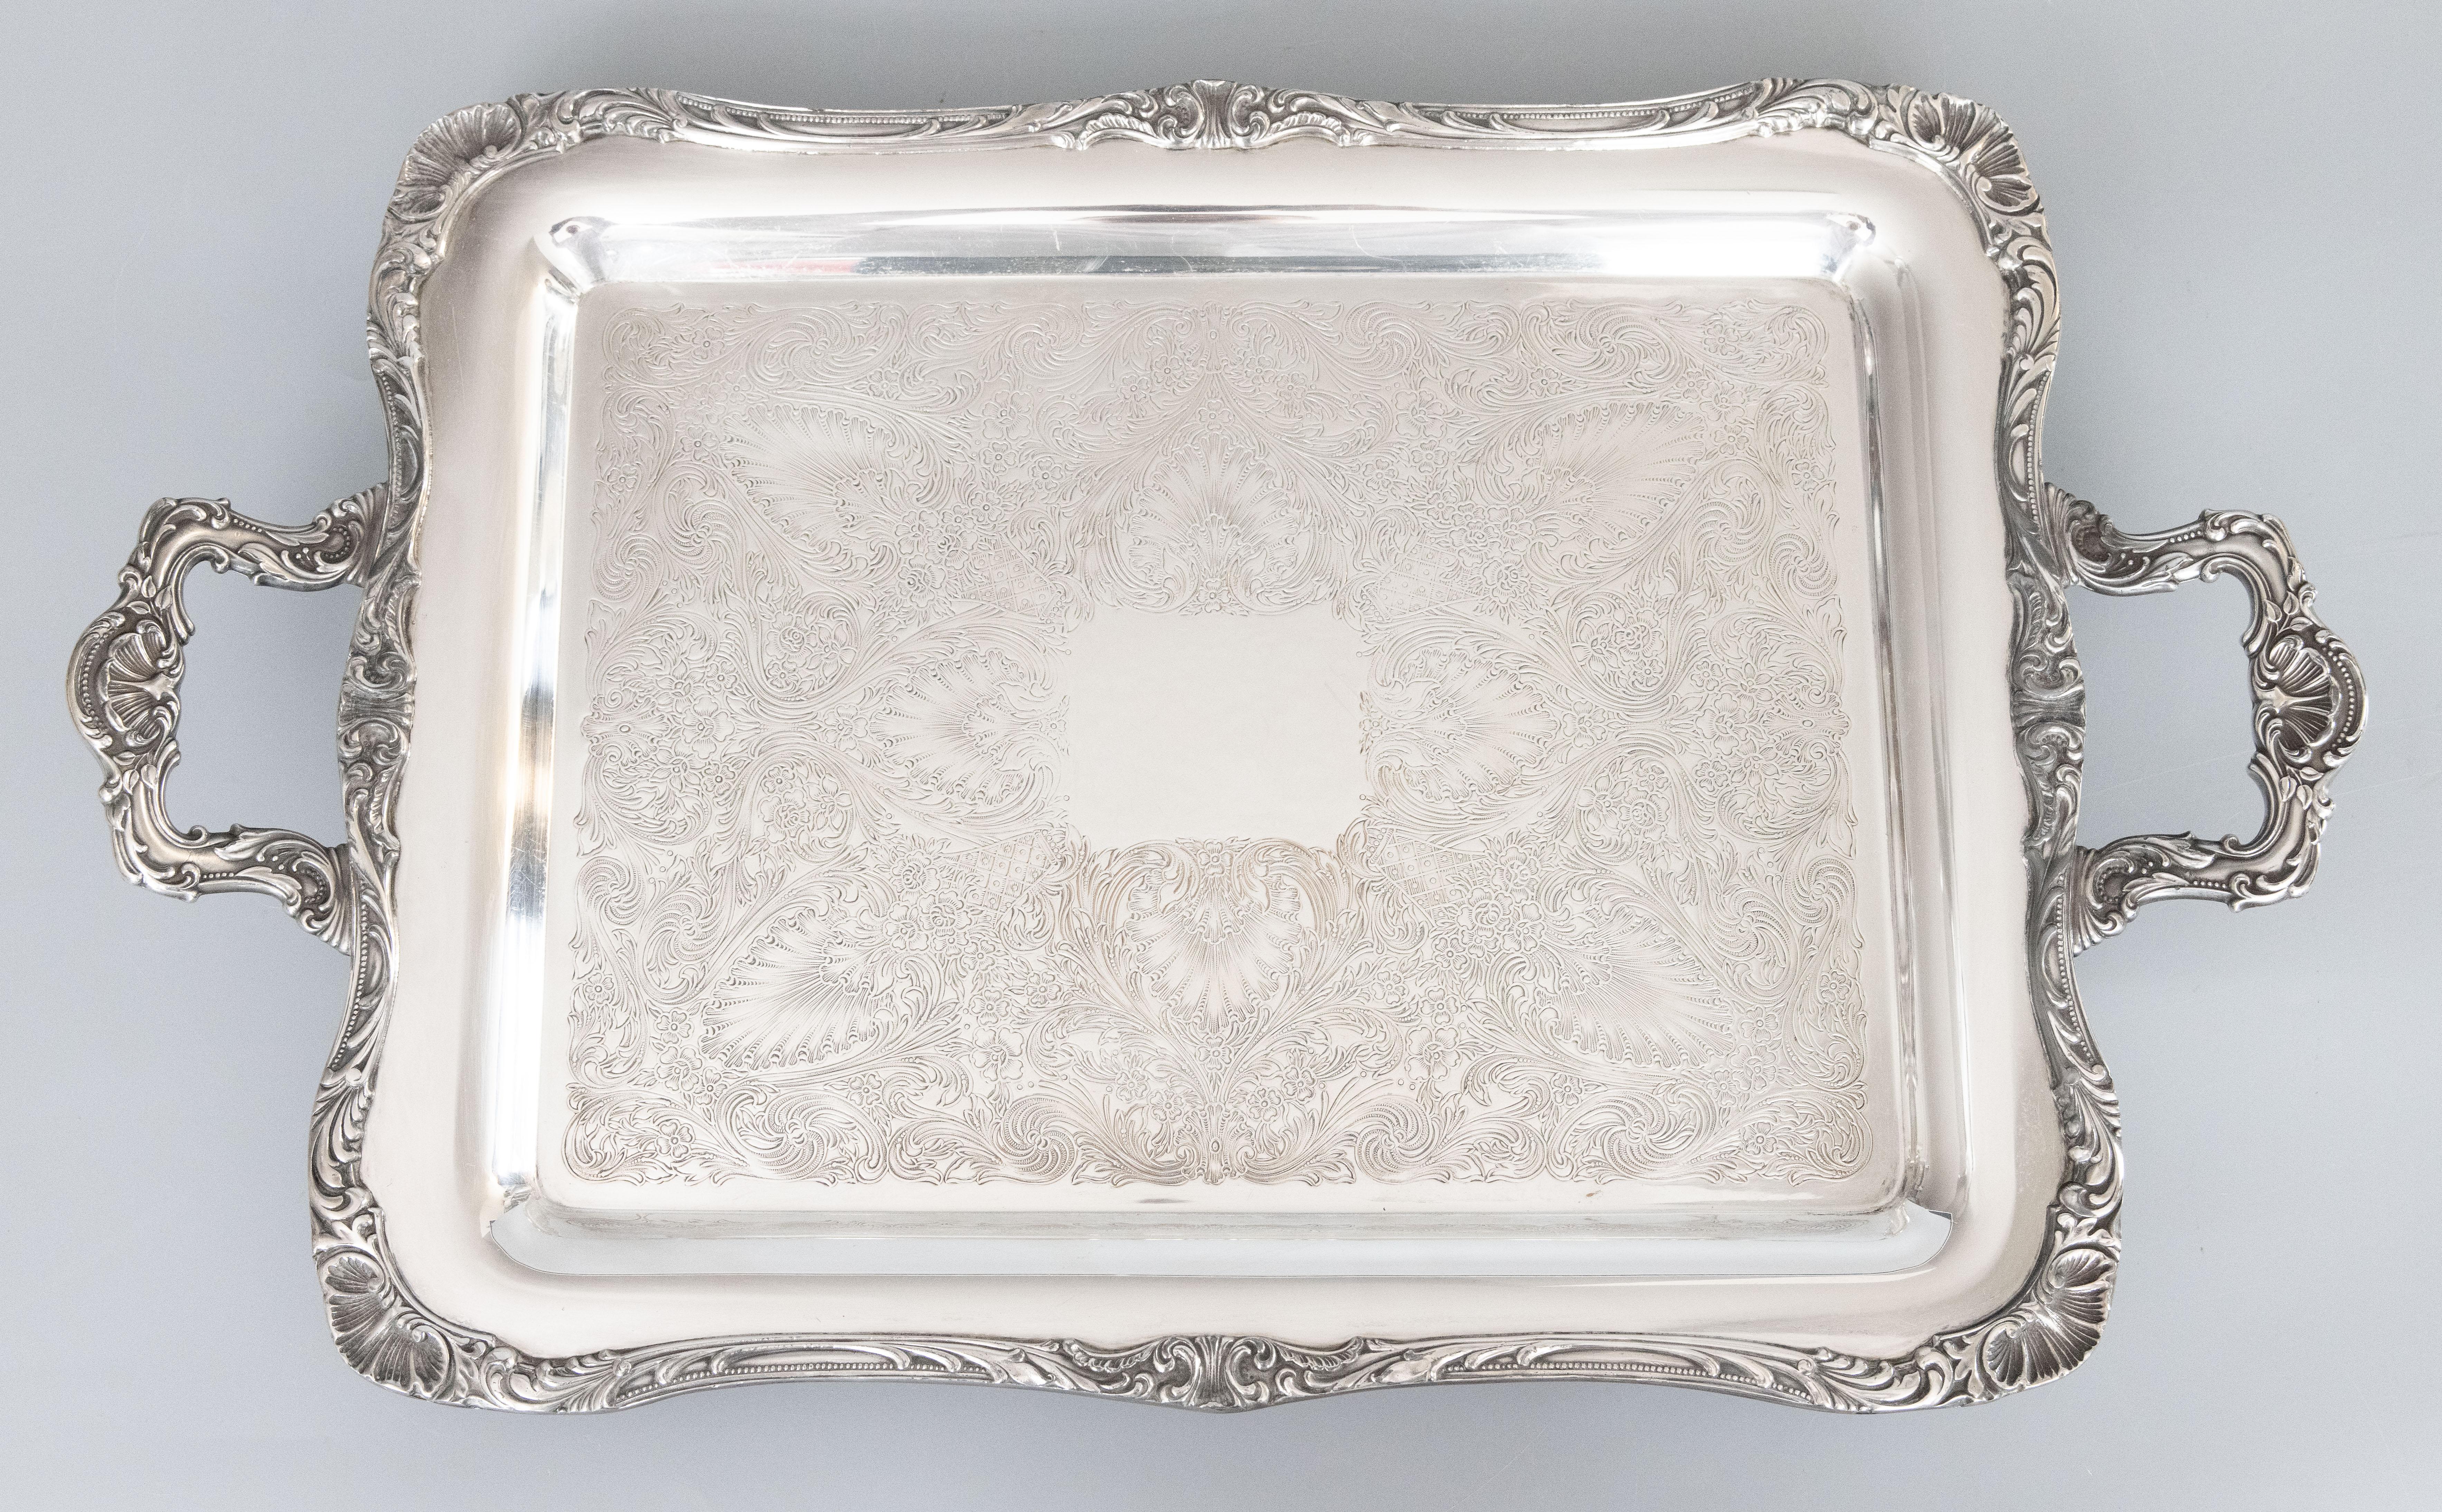 Wm Rogers Silver Plate Footed Rectangular Serving Tray With Handles, circa 1950 For Sale 4